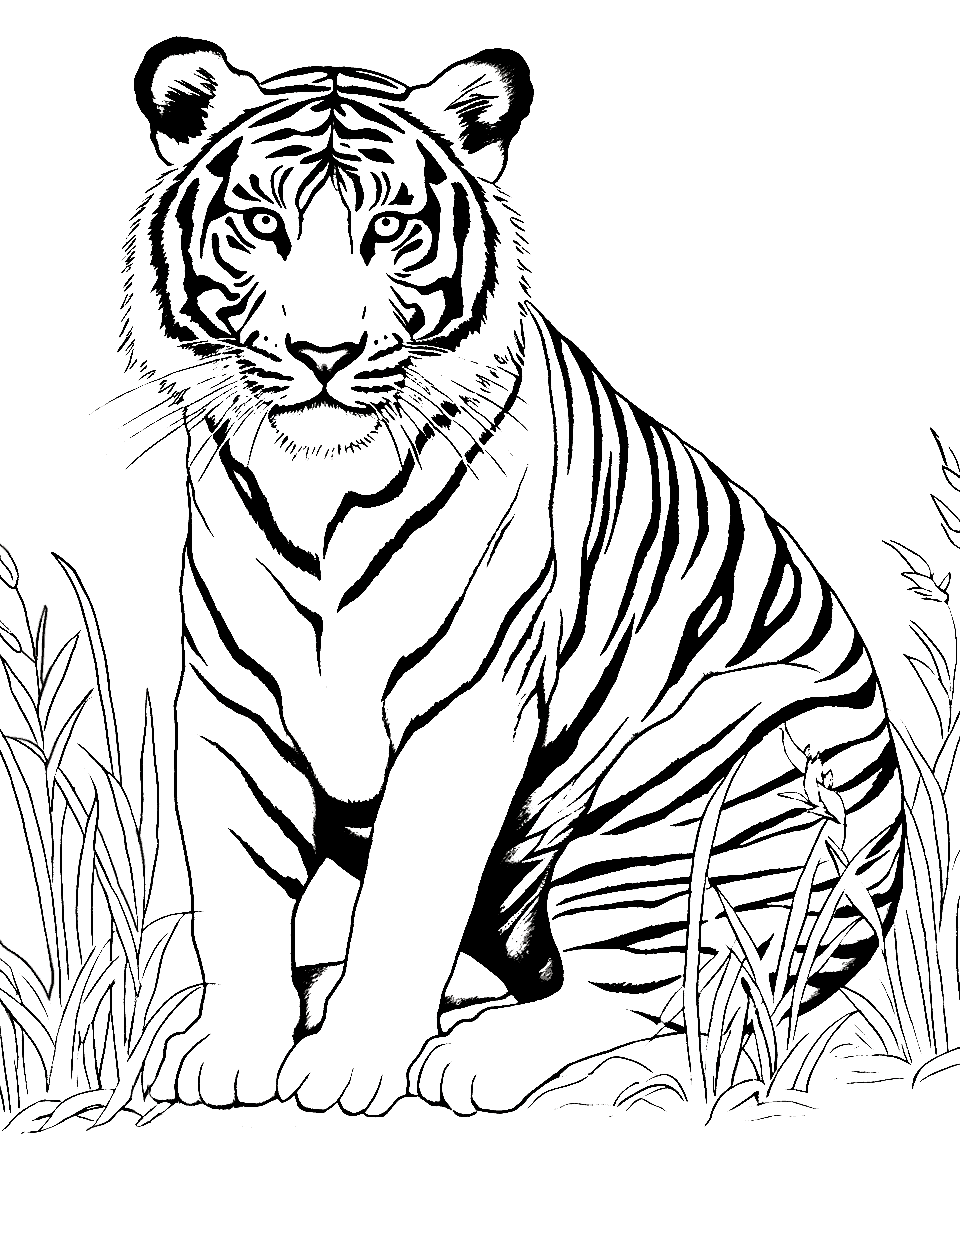 Realistic Bengal Tiger Coloring Page - A lifelike Bengal tiger calmly sitting amidst the grass.